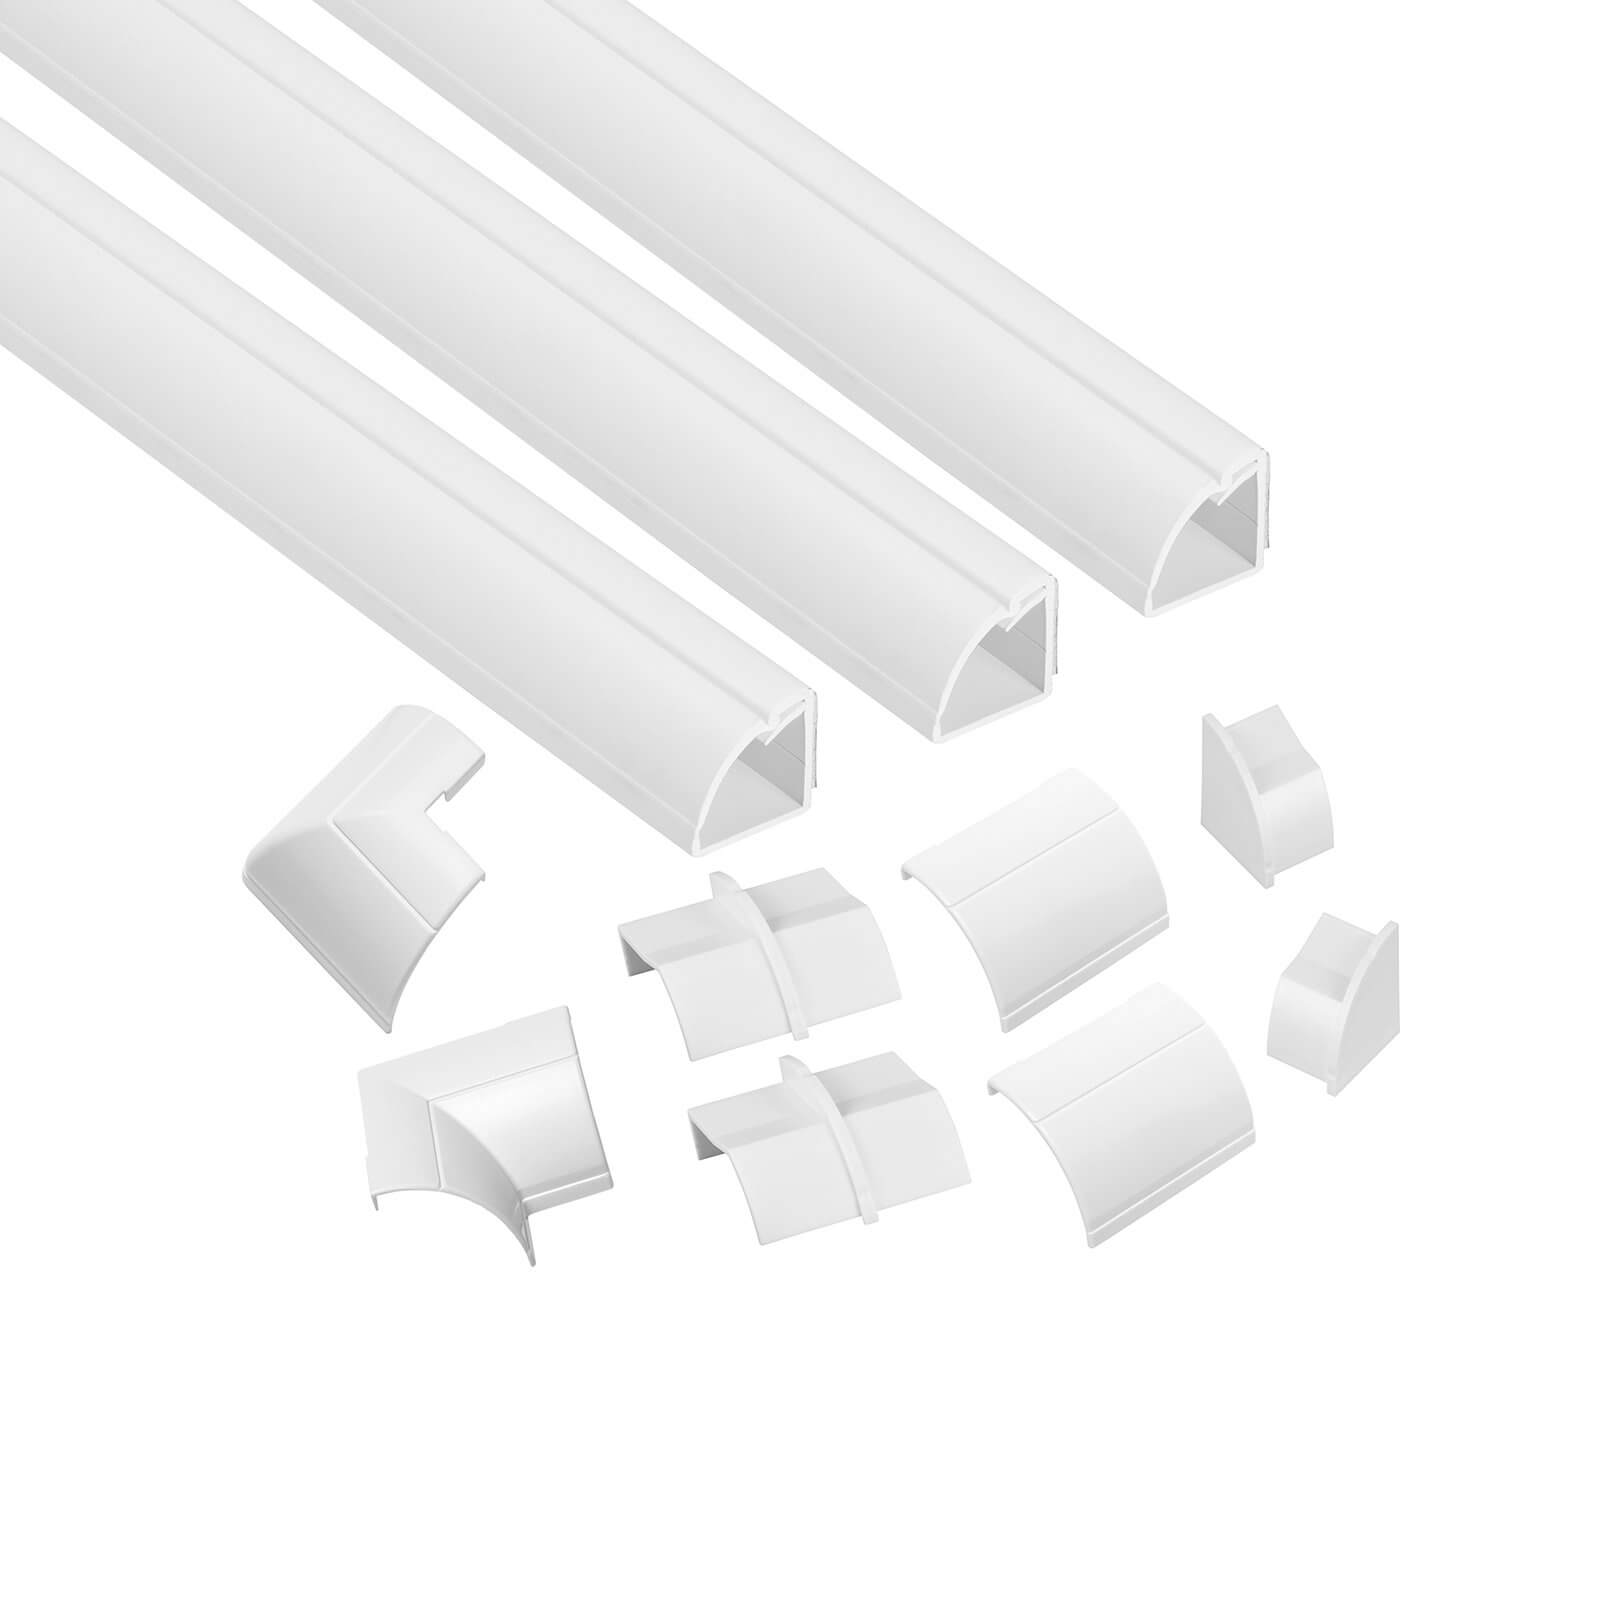 Photo of D-line Quadrant Trunking Multipack 3 X 22mm X 22mm X 1-metre Lengths & Accessories - White